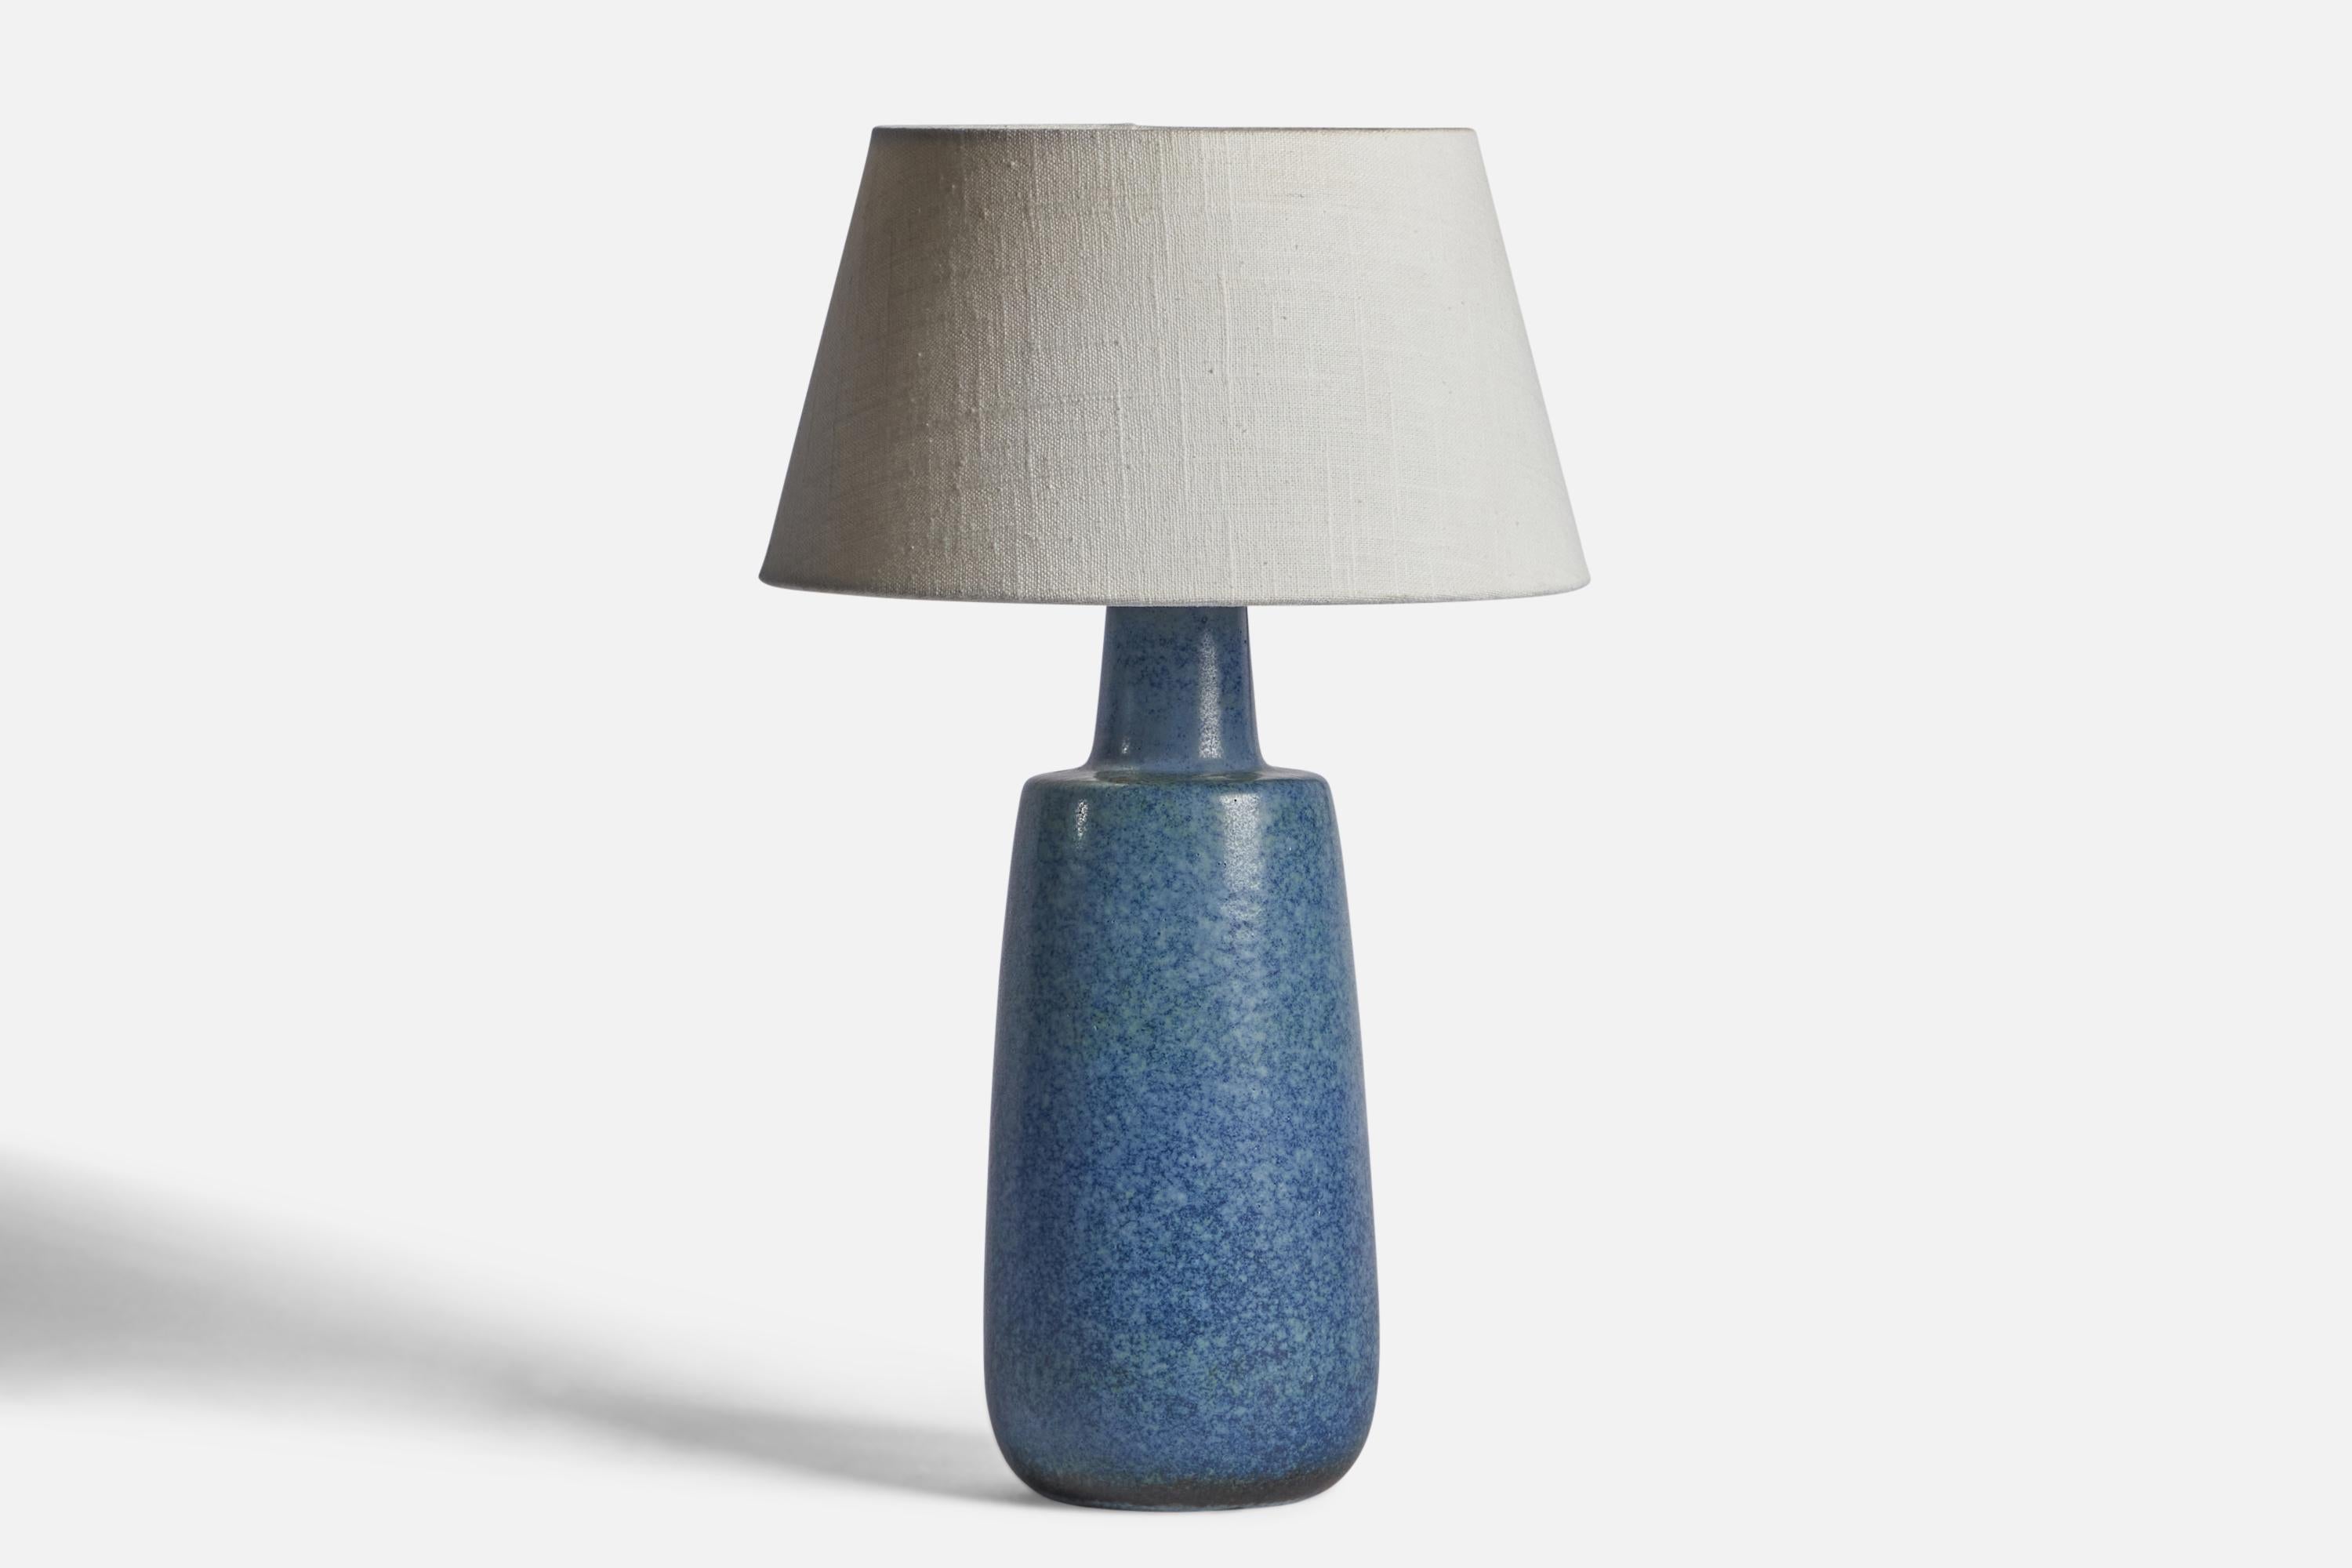 A blue-glazed stoneware table lamp designed by Carl-Harry Stålhane and produced by Rörstrand, Sweden, 1950s.

Dimensions of Lamp (inches): 13.6” H x 4.75” Diameter
Dimensions of Shade (inches): 7” Top Diameter x 10” Bottom Diameter x 5.5” H